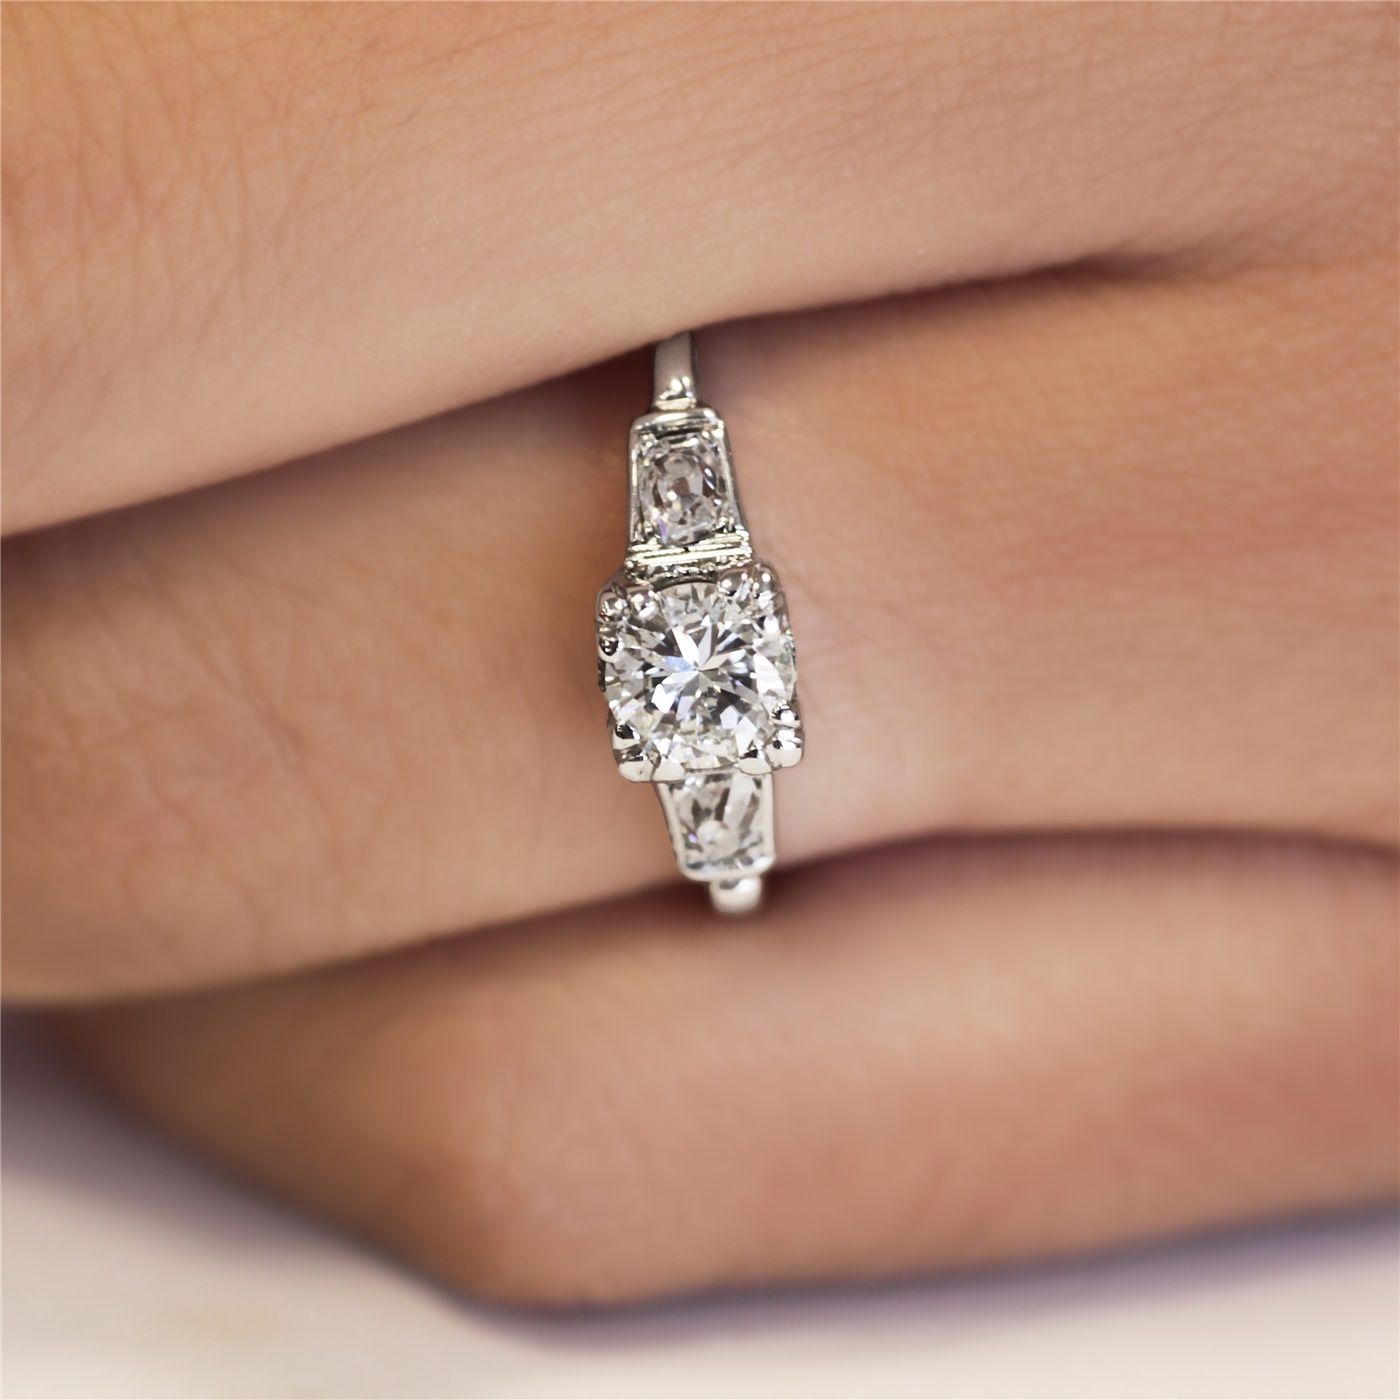 Vintage Engagement Ring with 1/2 Carat Diamond - Art Deco Style